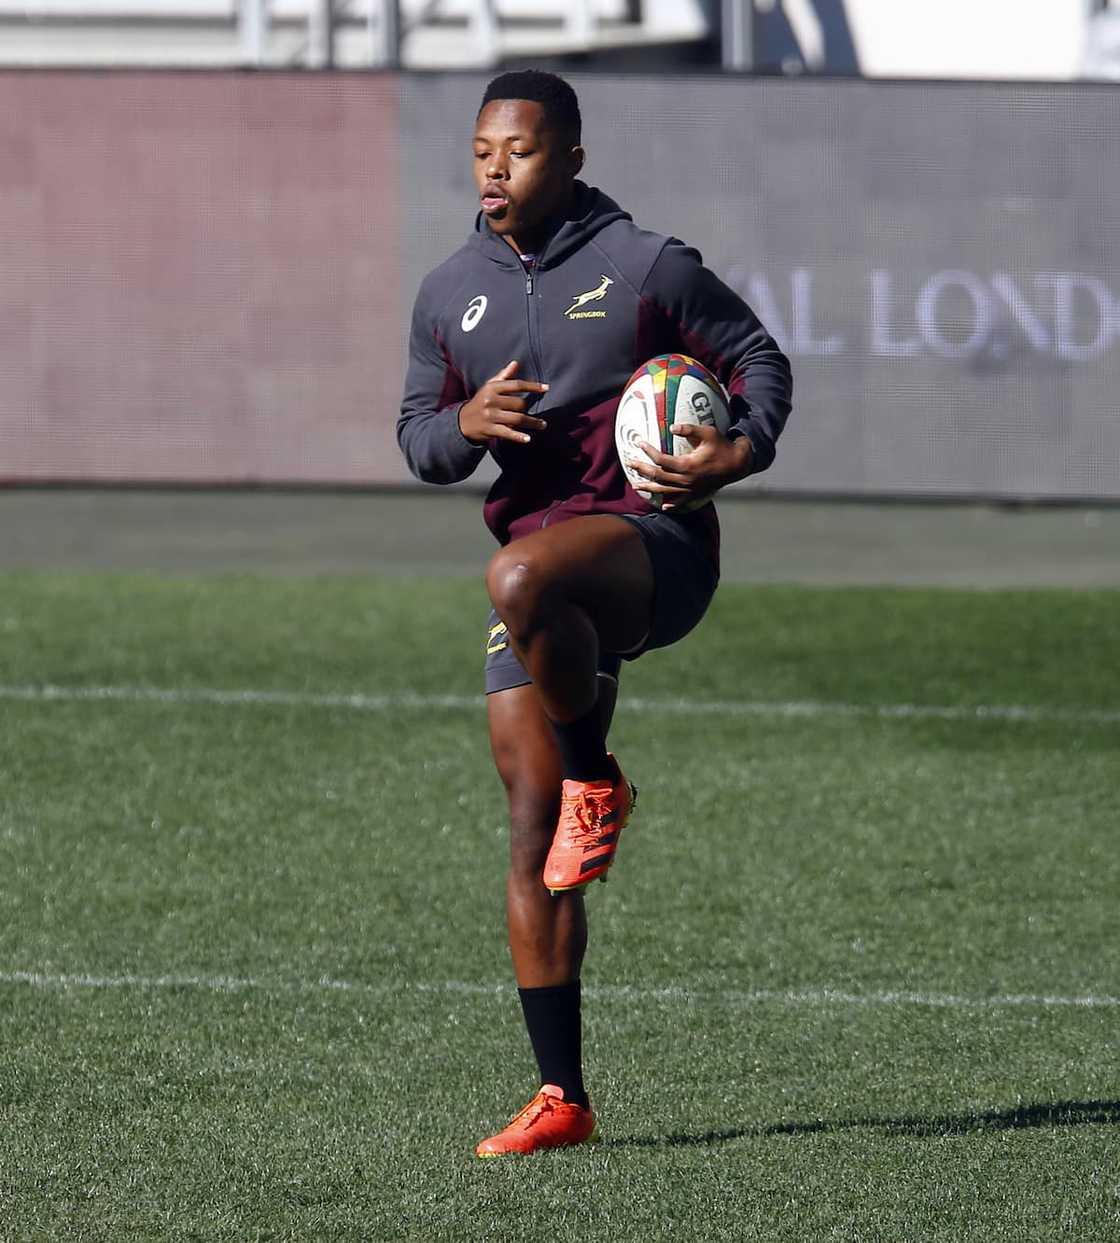 Why is Sbu Nkosi not playing for the Springboks?